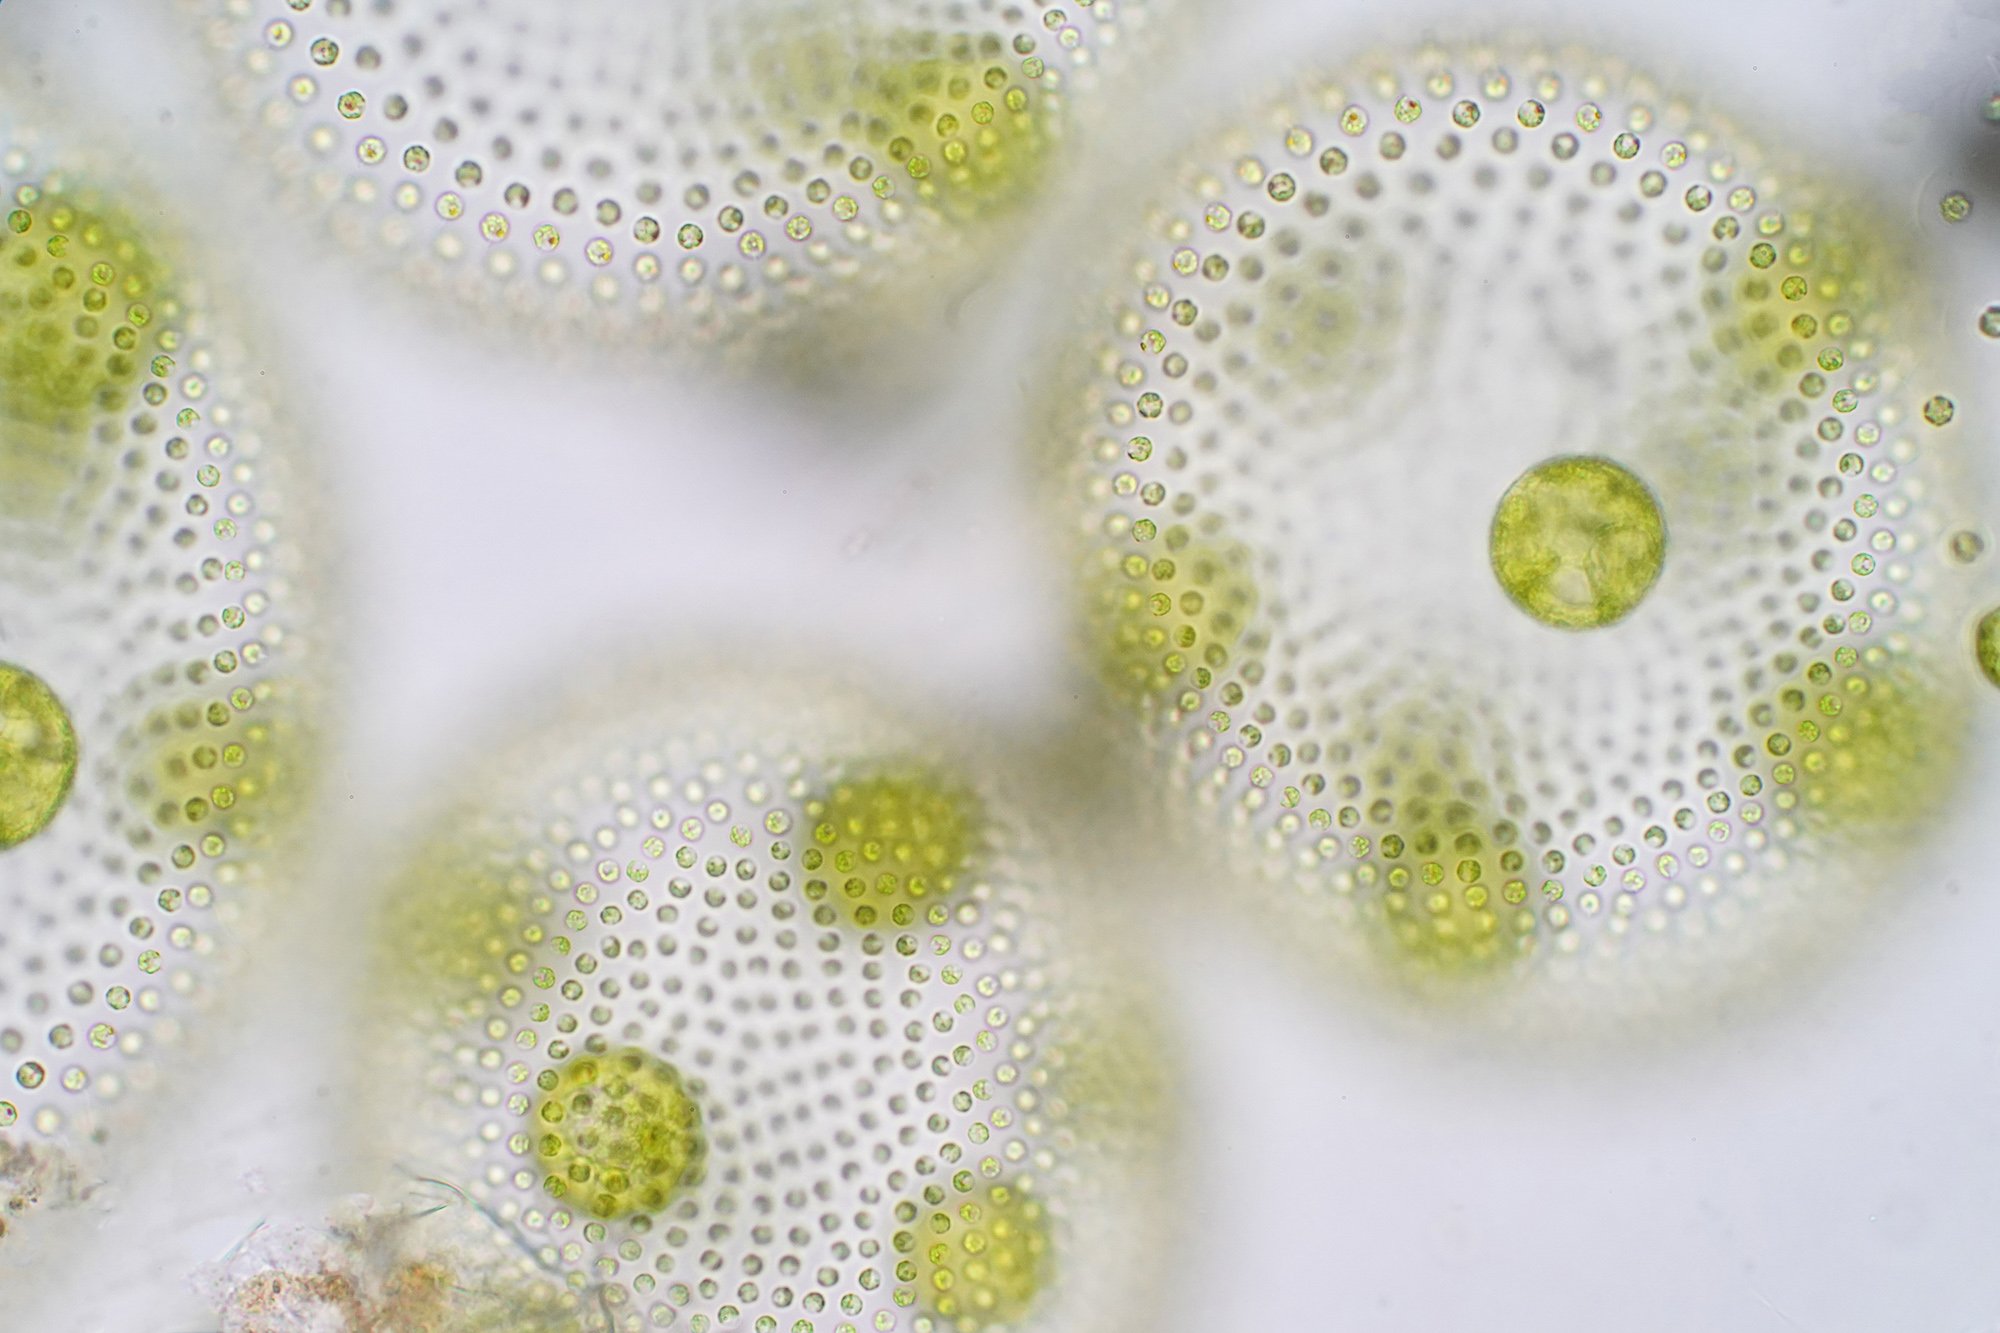 Green algae cells representing science and technology concept